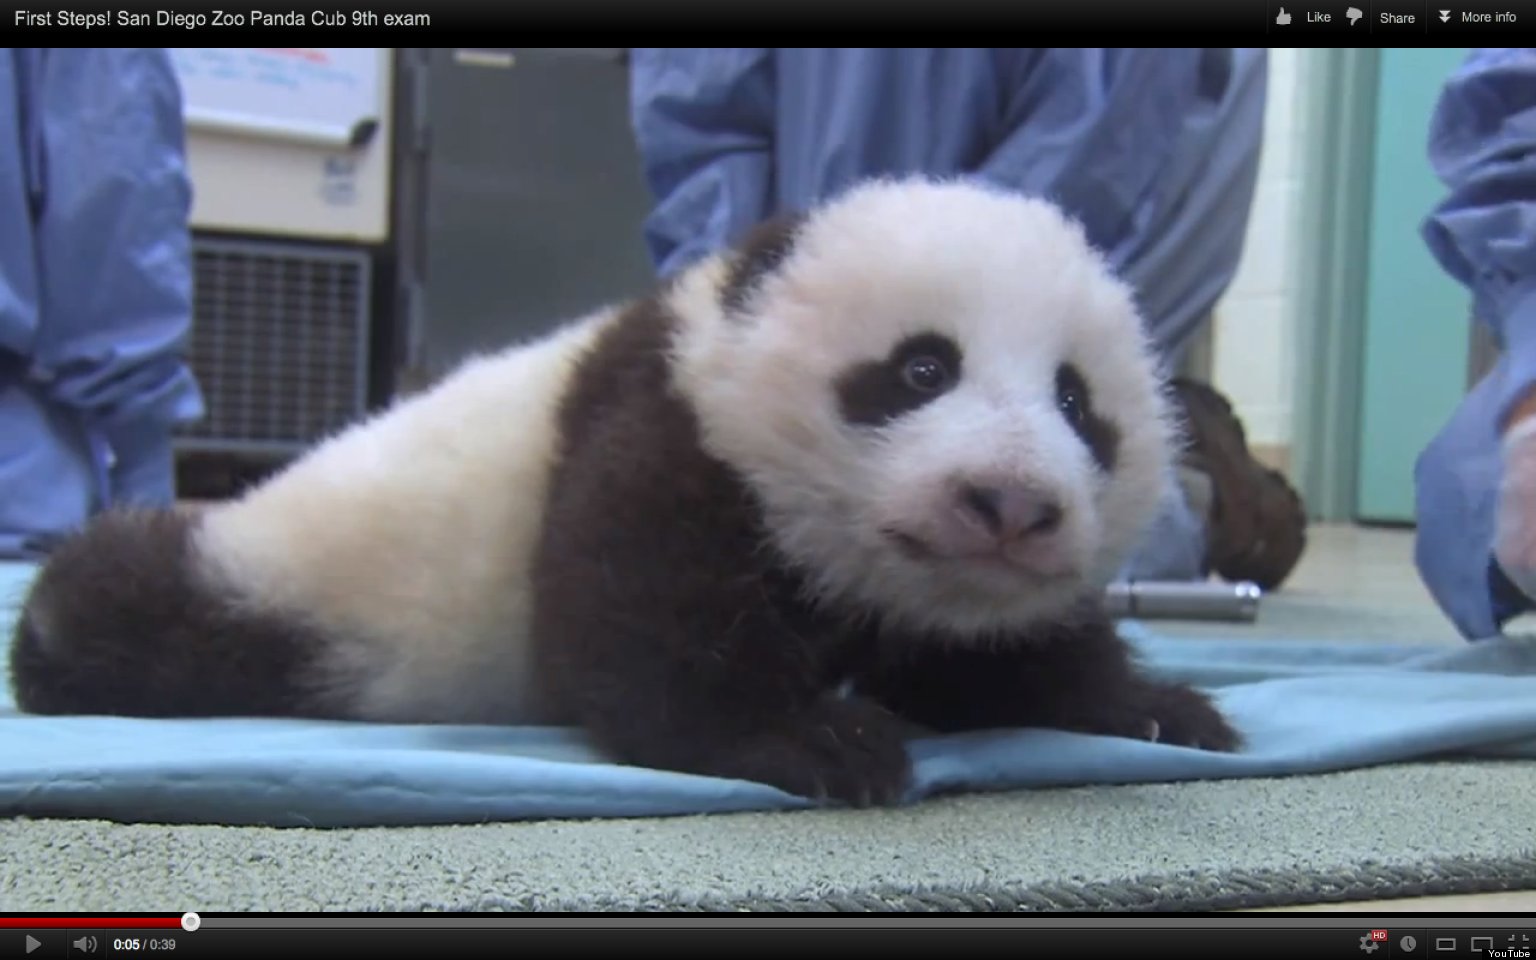 Baby Panda Takes First Steps San Diego Zoos Adorable Cub Learns To